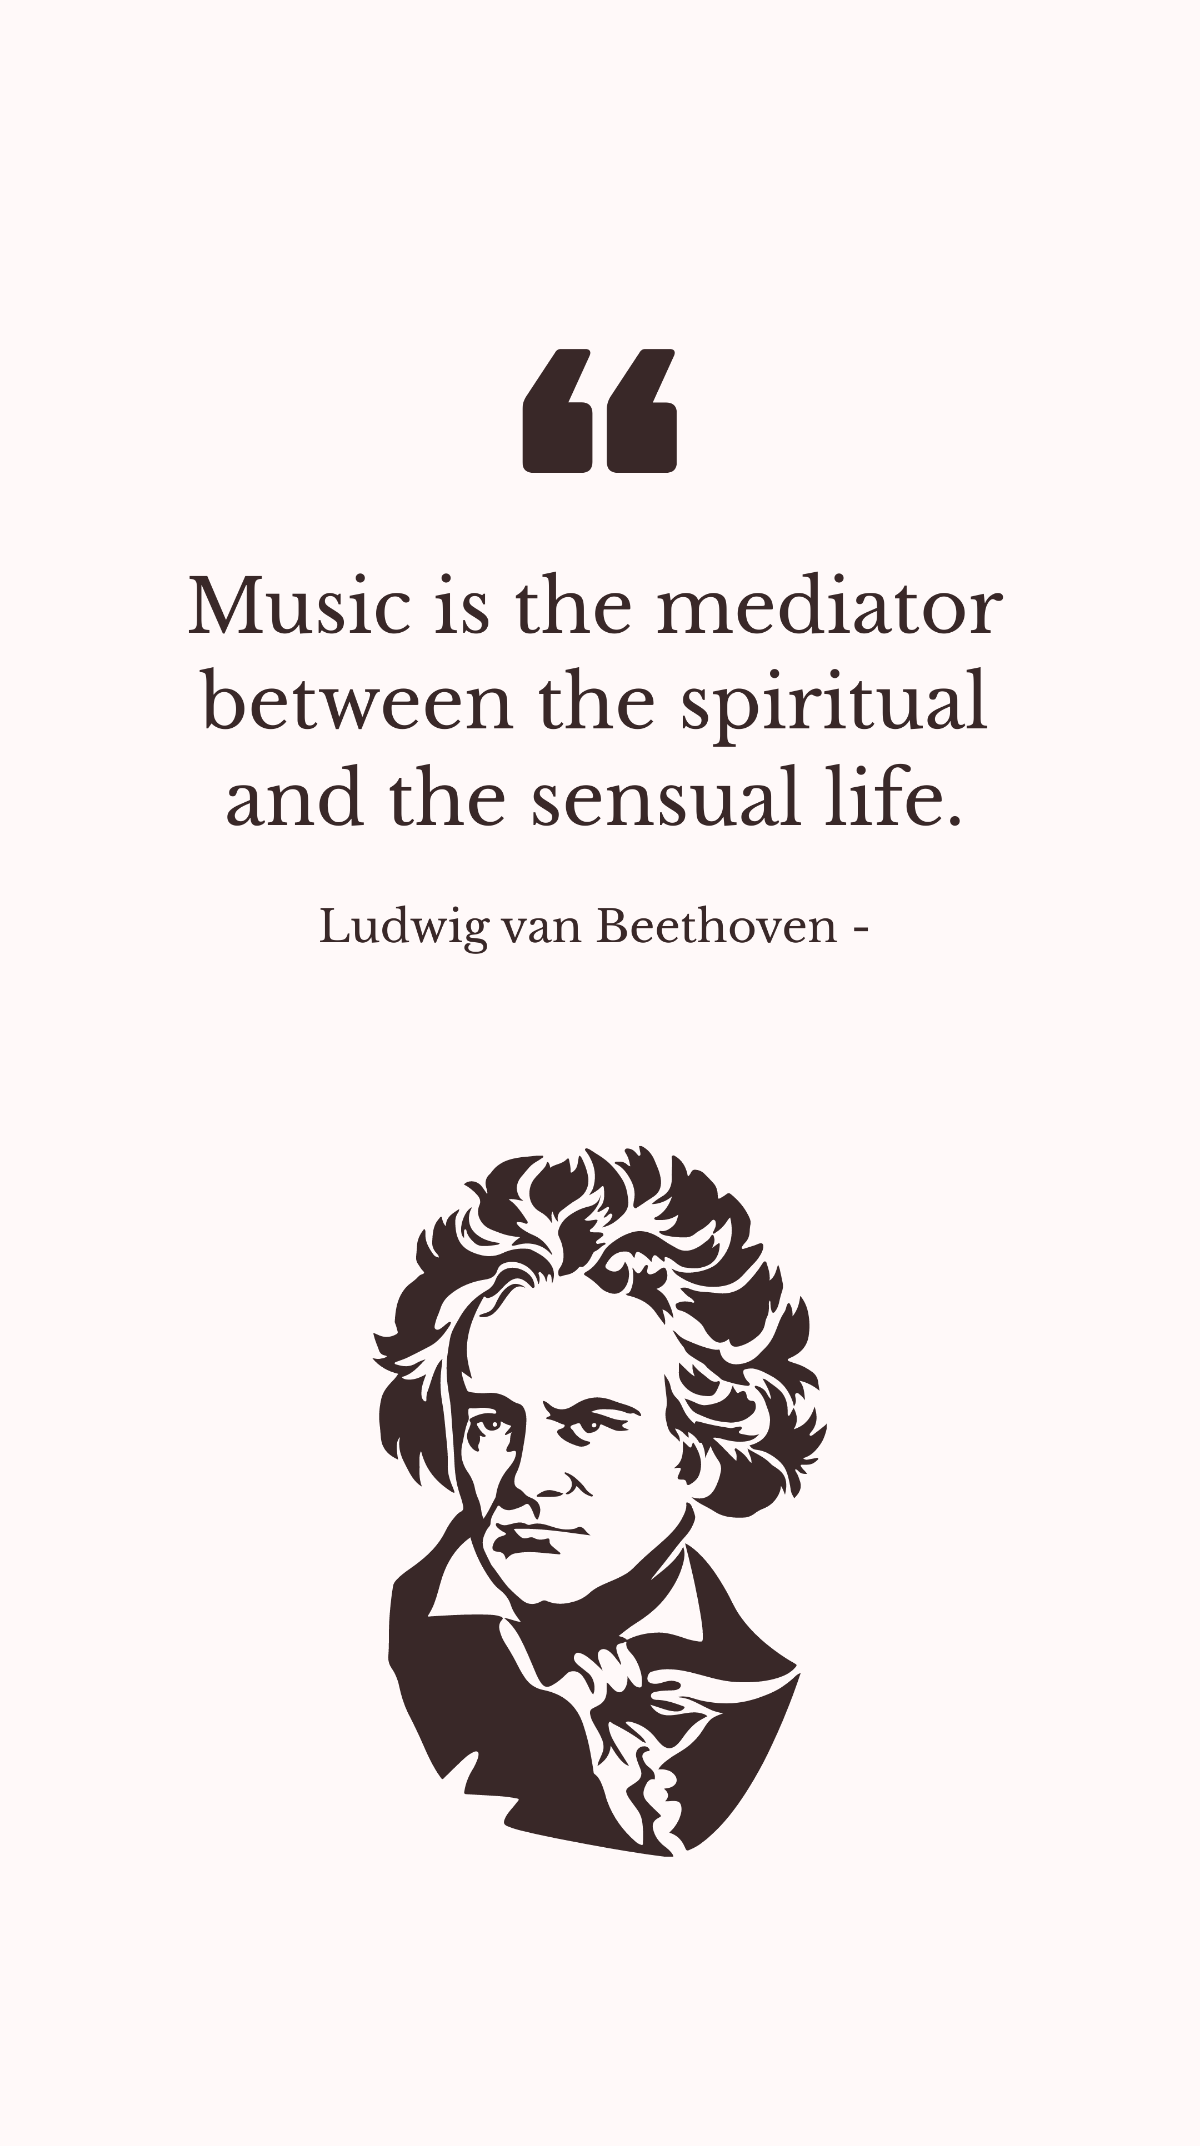 Ludwig van Beethoven - Music is the mediator between the spiritual and the sensual life. Template